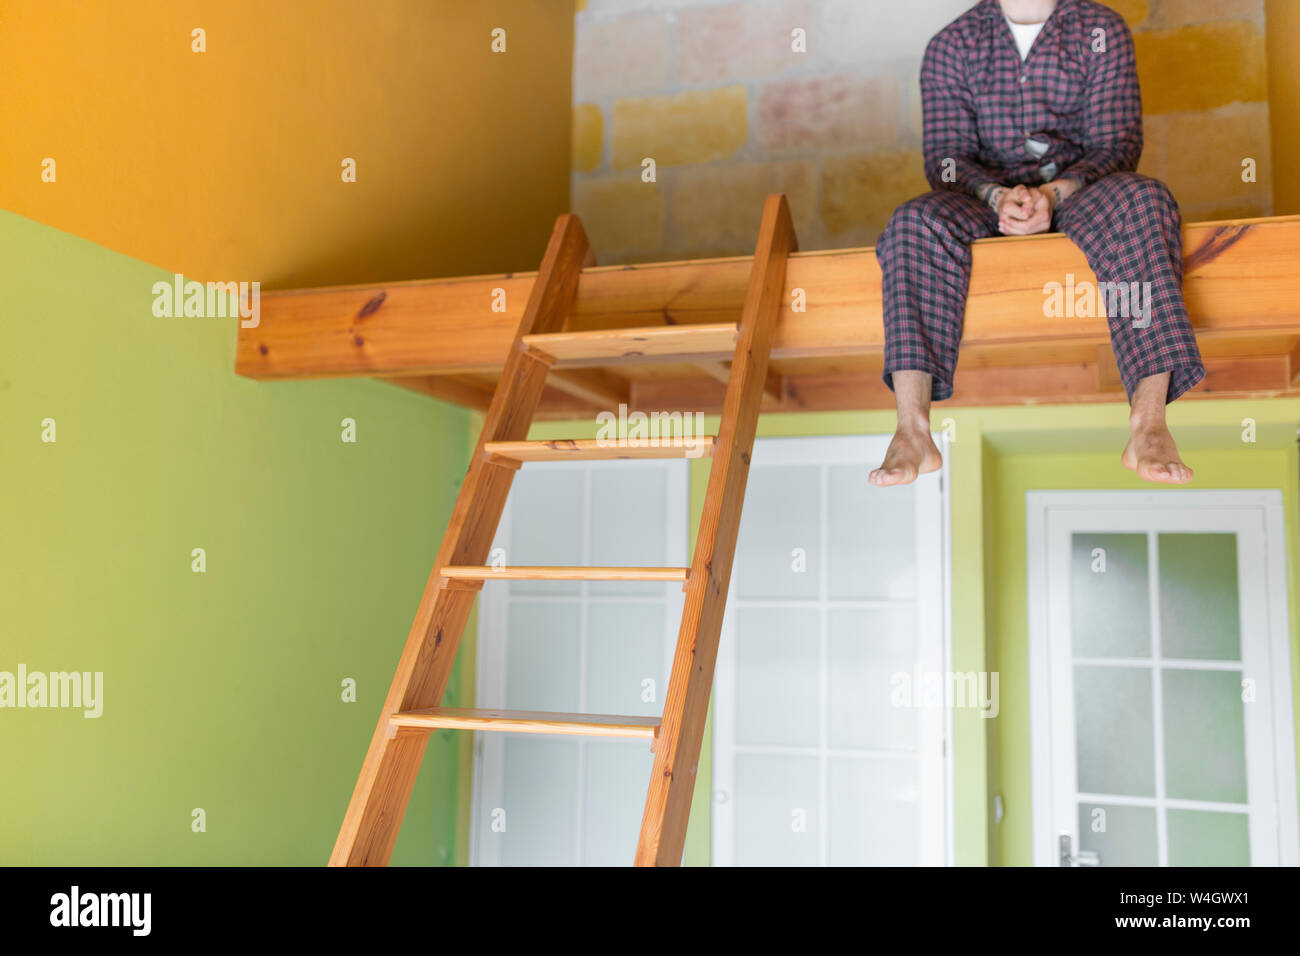 Man wearing a pyjama and sitting on loft bed at home Stock Photo